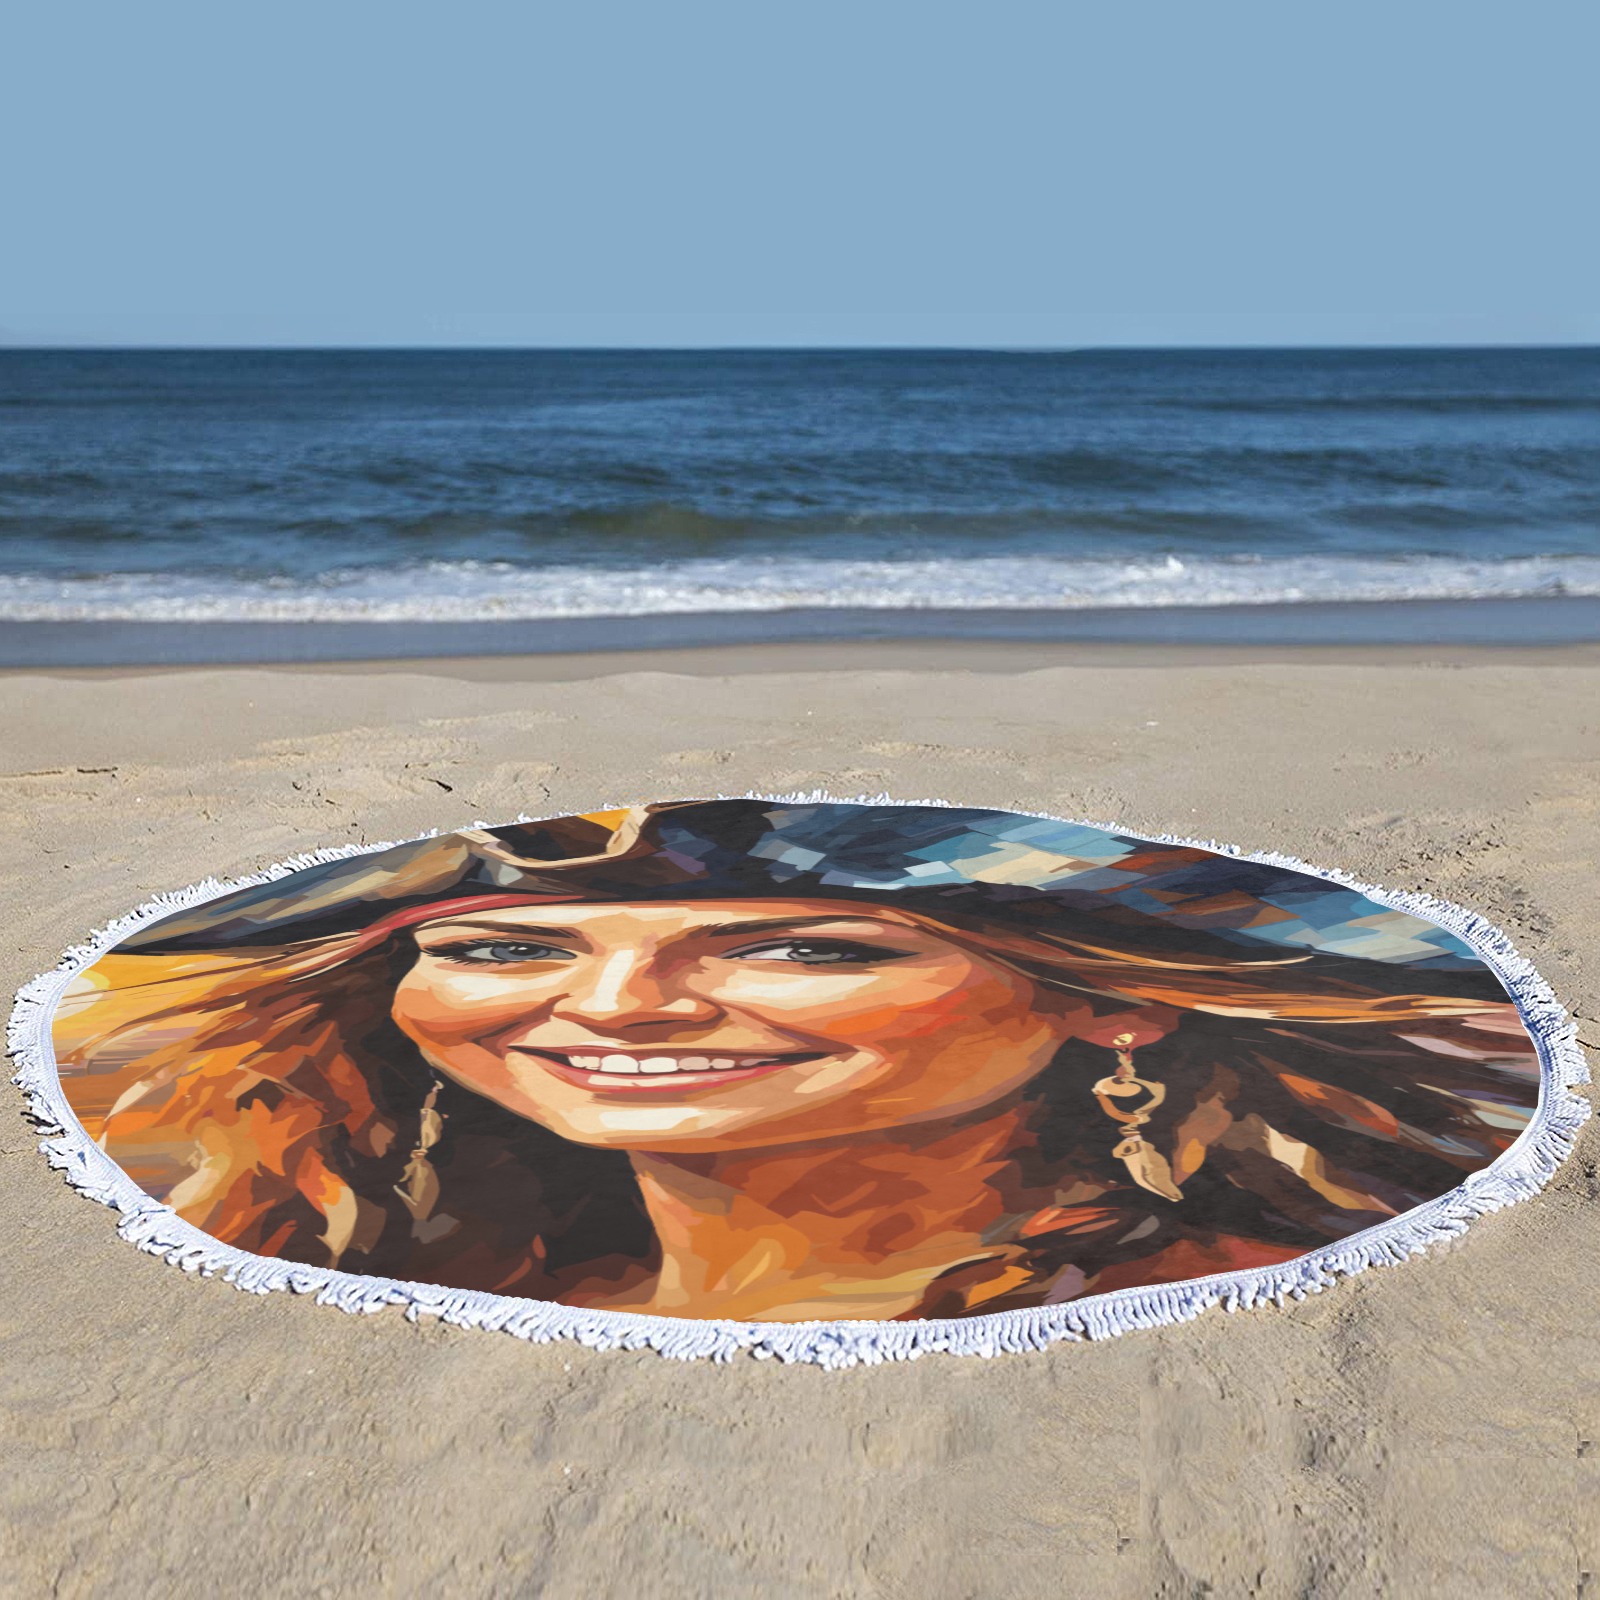 Lovely smiling pirate woman by the sea at sunset. Circular Beach Shawl Towel 59"x 59"